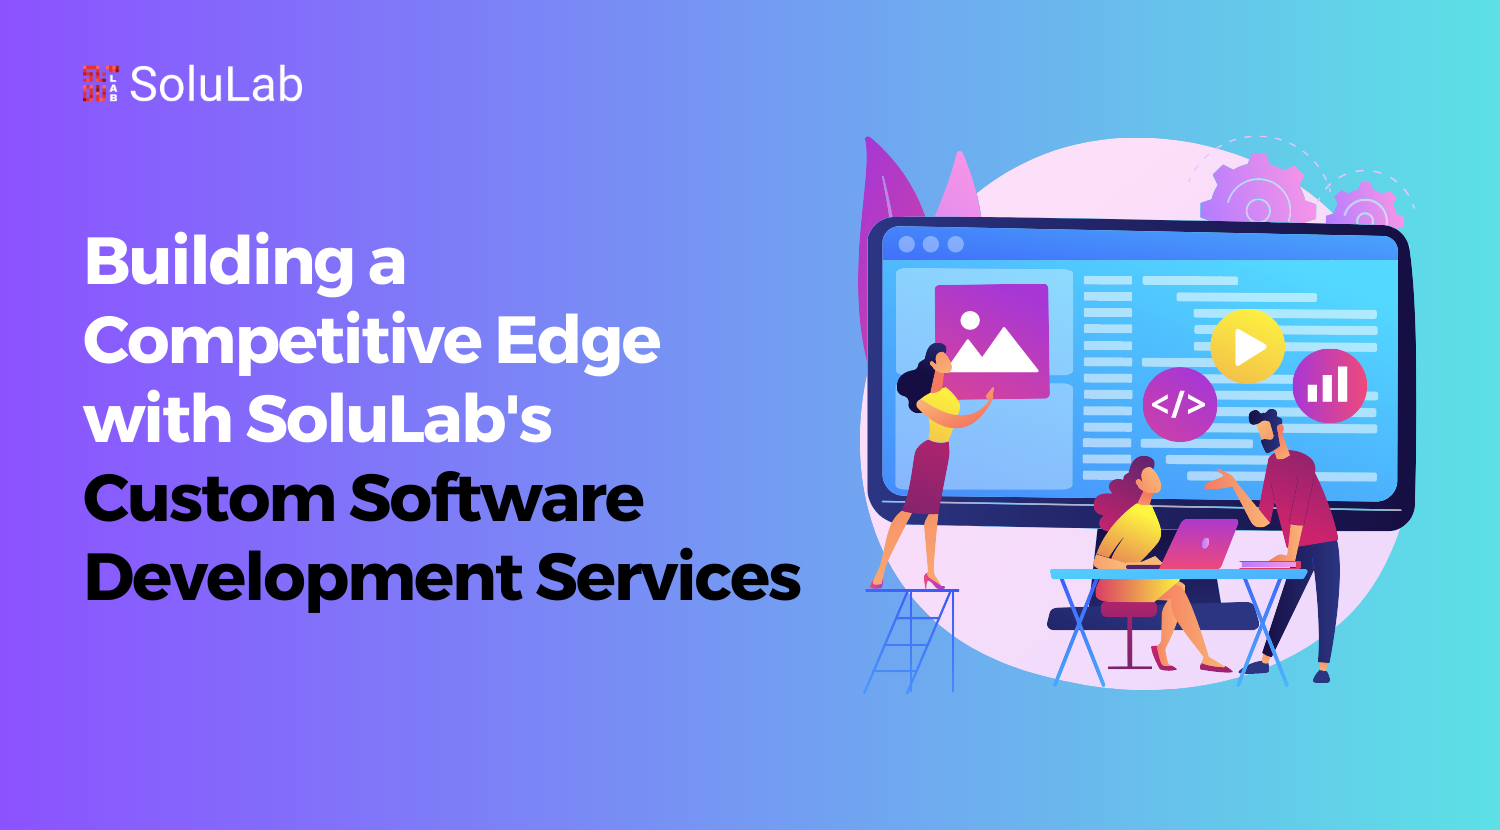 Building a Competitive Edge with SoluLab's Custom Software Development Services